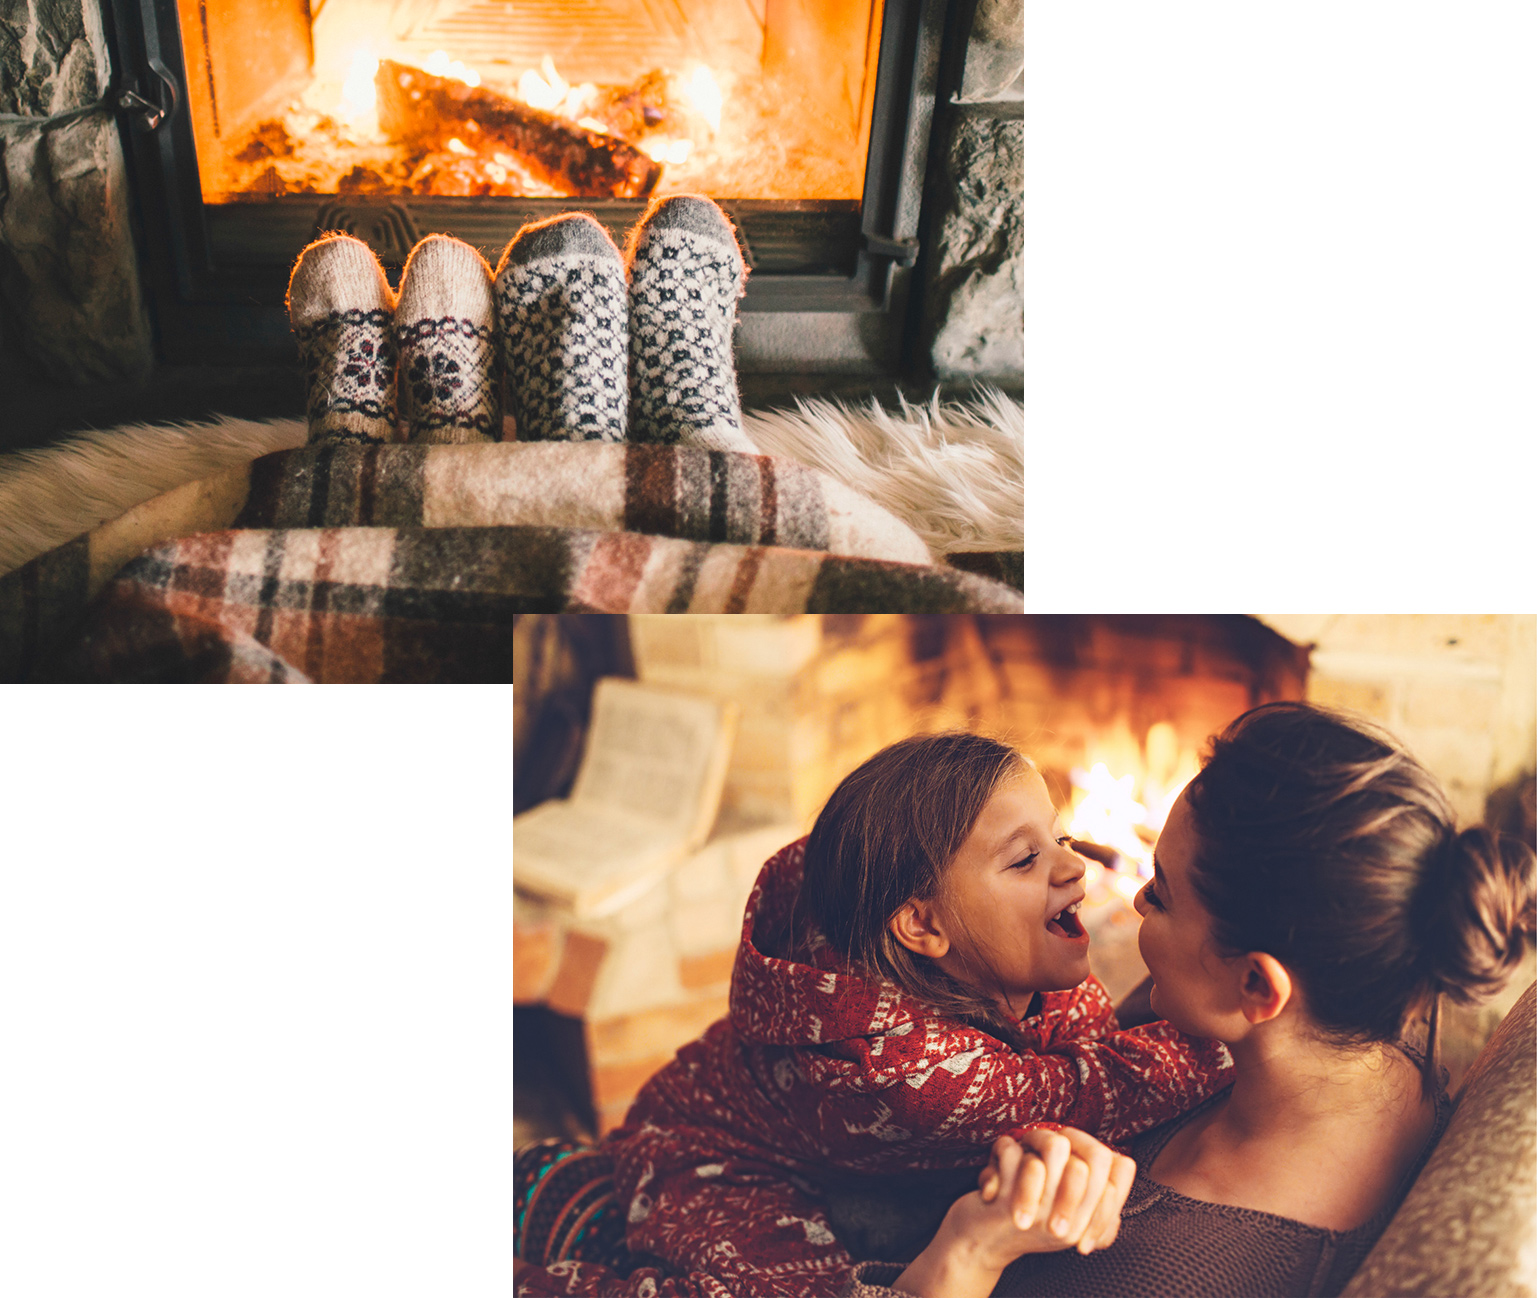 Warming feet by the fire, mother and daughter by the fire